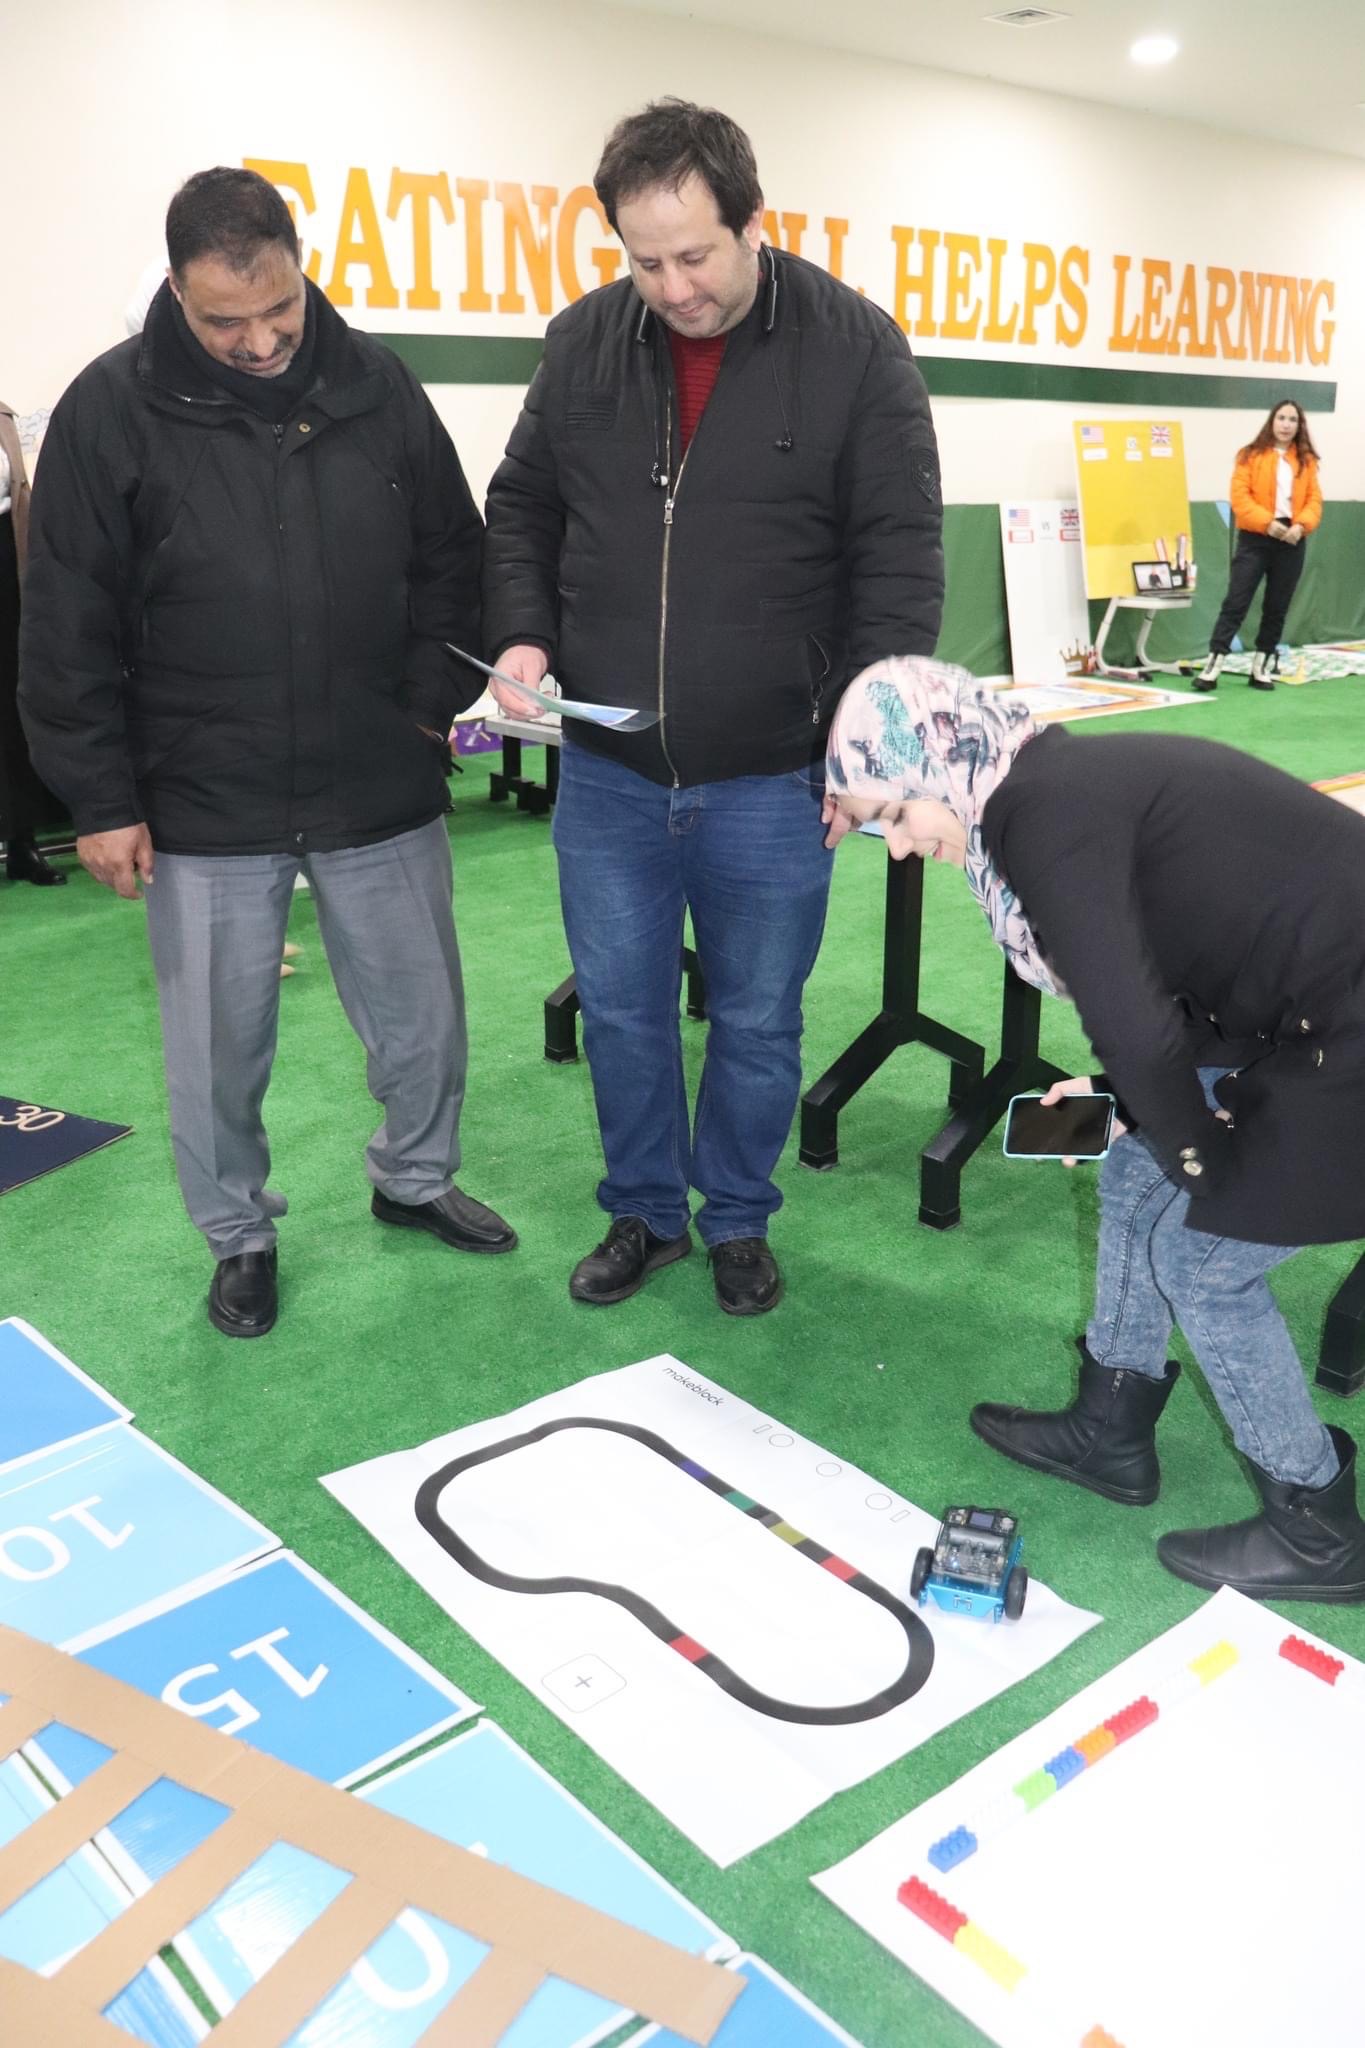 Mrs. Noor explains how to implement robot in education and integrated robotics with science for Mr. Fawas and Mr. Hase  